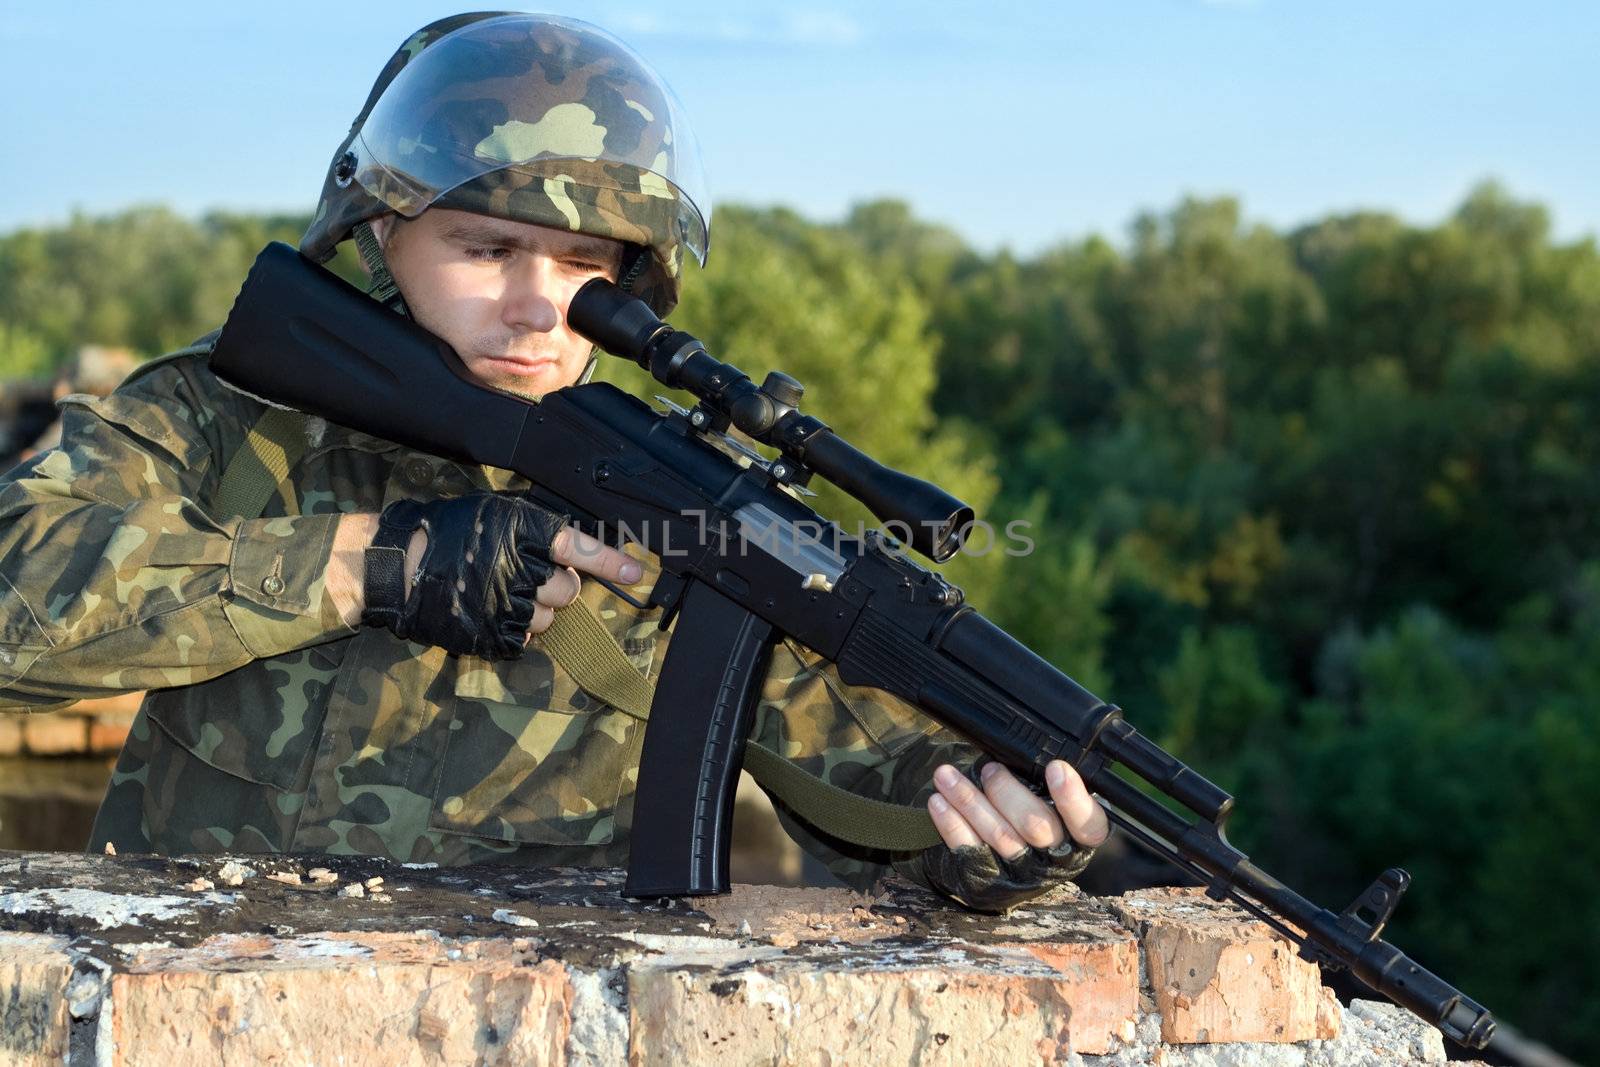 Portrait of sniper in camouflage uniform in action